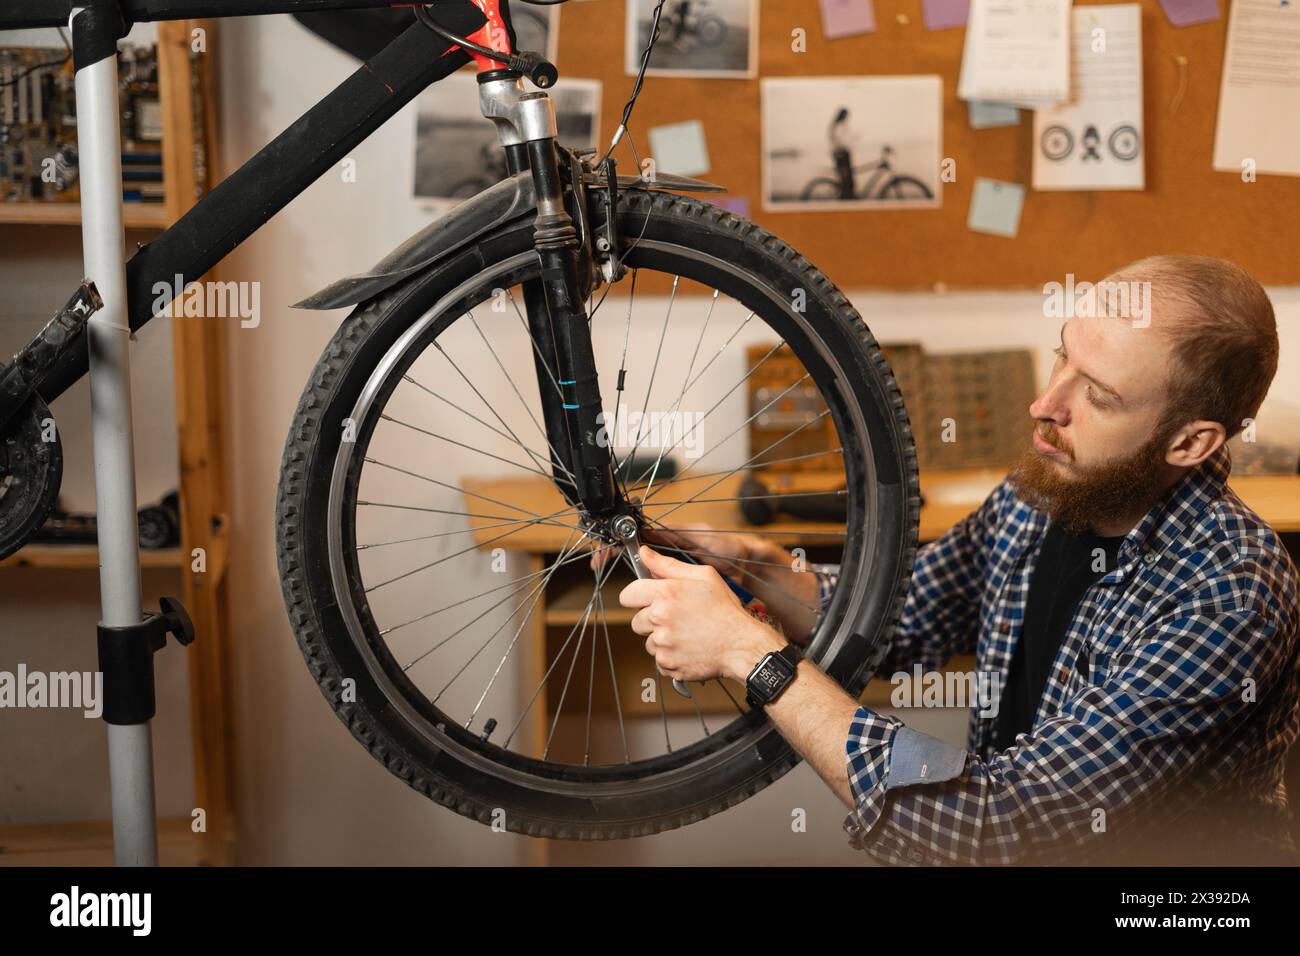 Bearded red-haired man in a checkered shirt repairs a bicycle while squatting in a garage or workshop Stock Photo